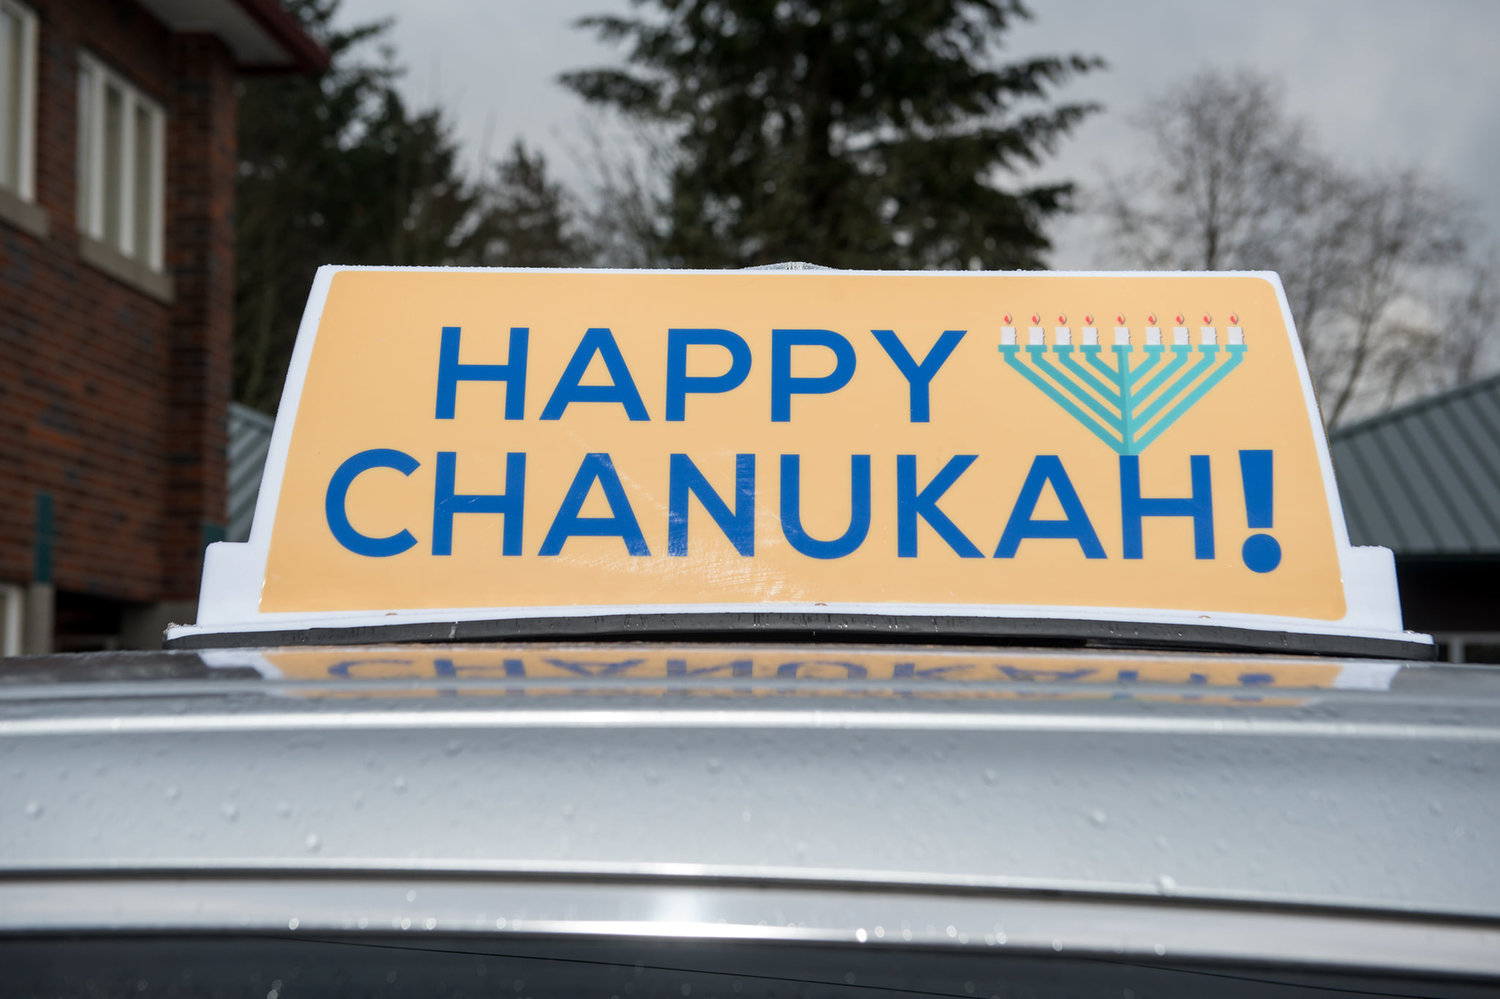 This is one of a variety of lighted decorations planned for use on every car participating in the Chanukah parade.